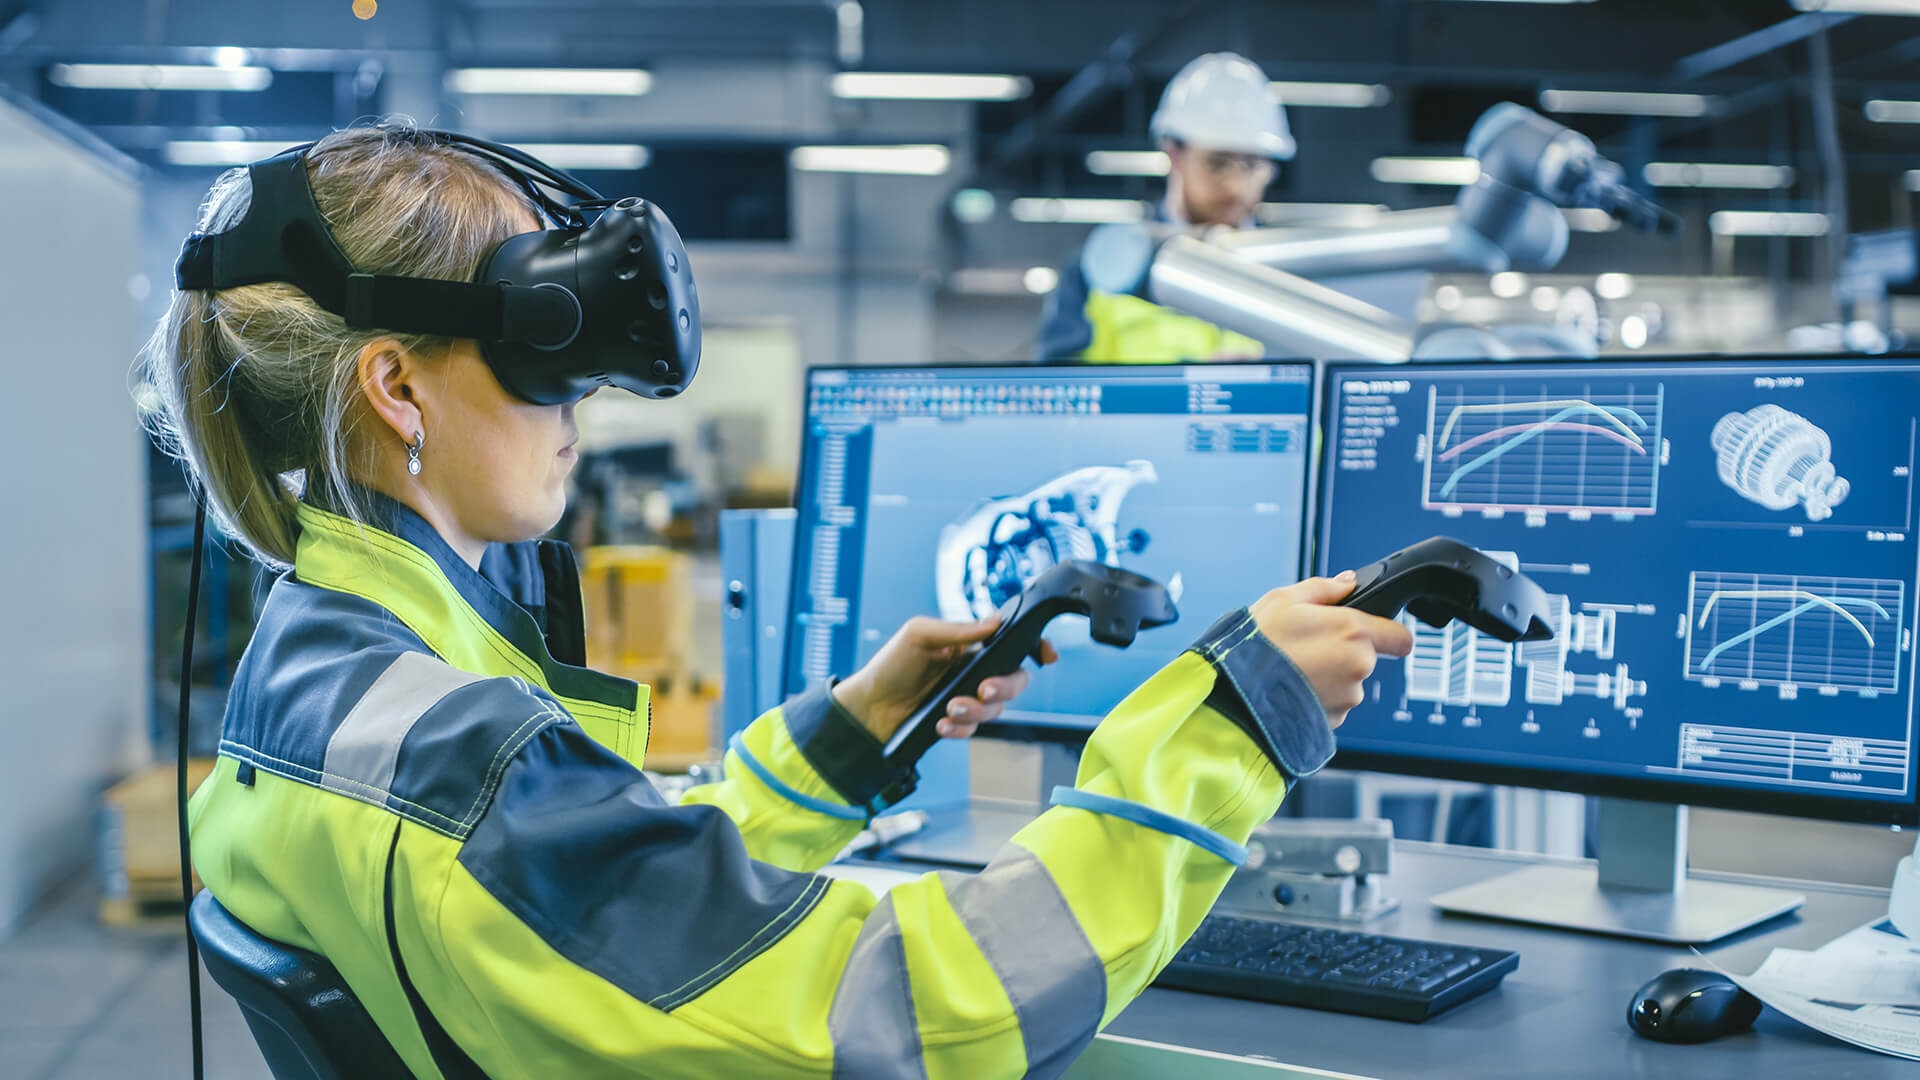 Implementing Virtual & Augmented Reality for Manufacturing Training